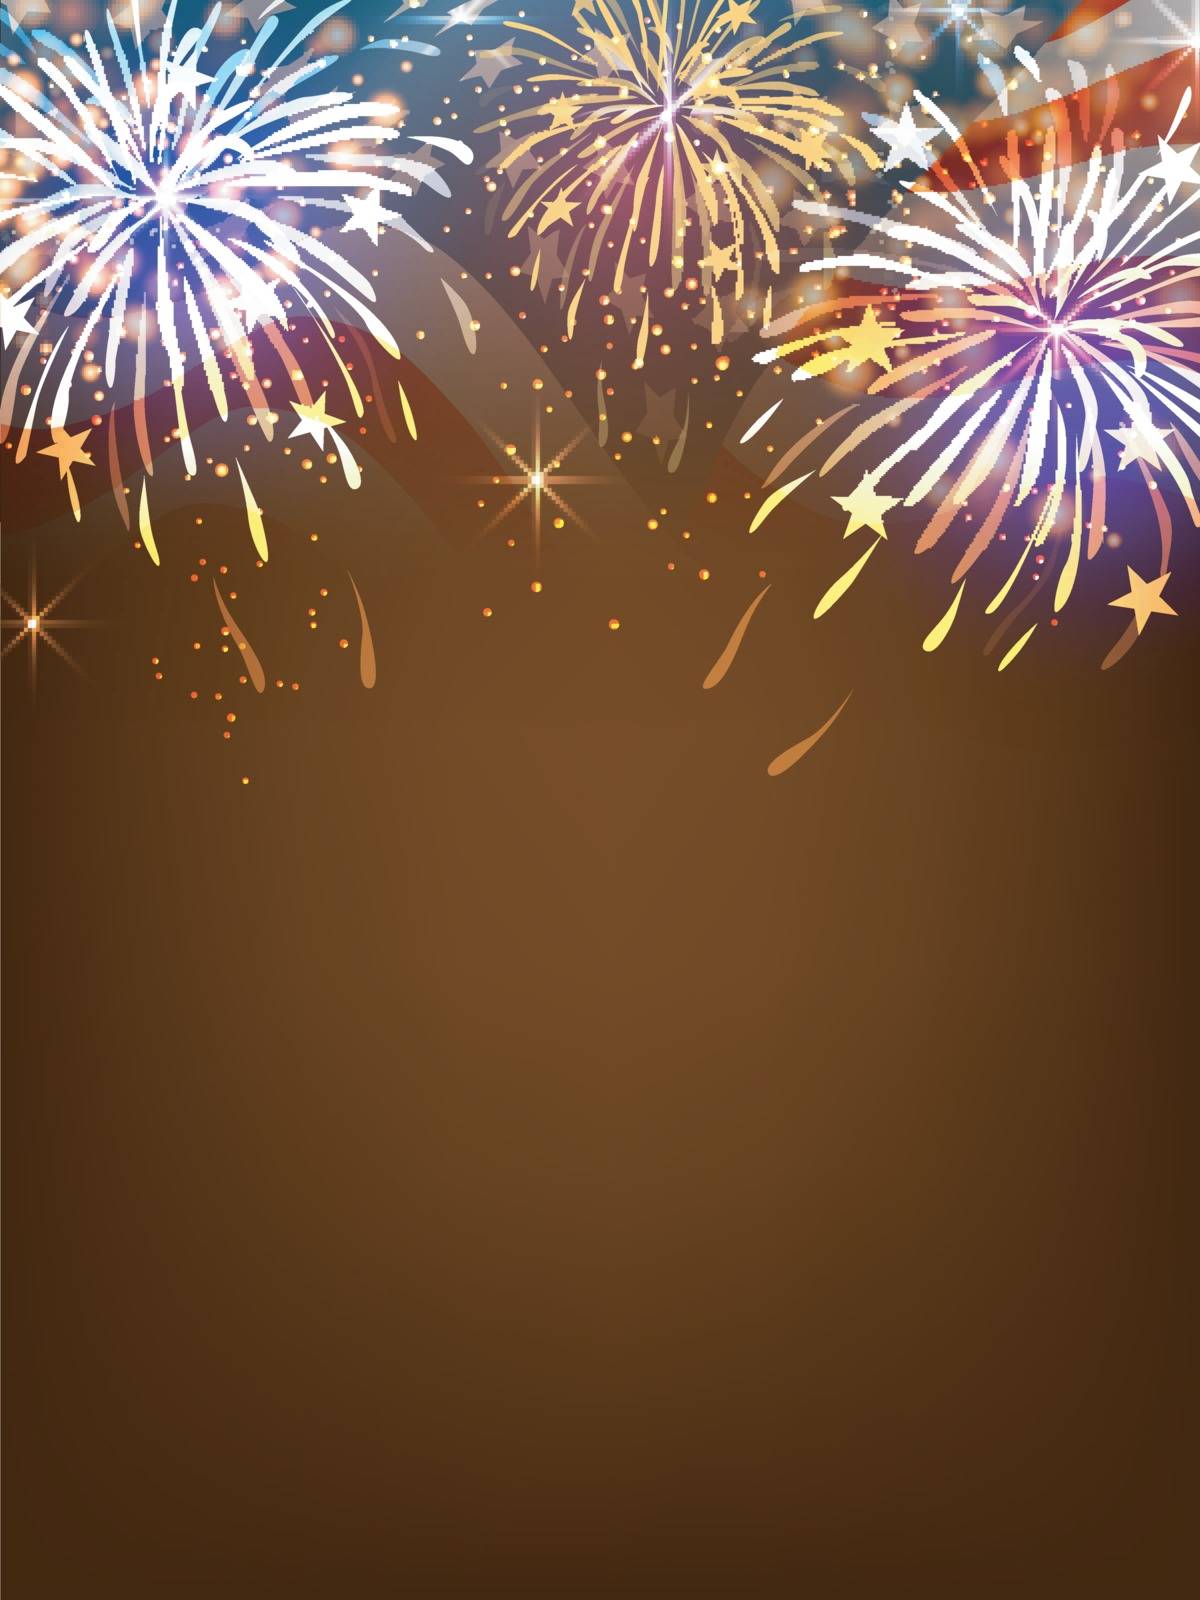 Fireworks background for 4th of July celebration. by aispl